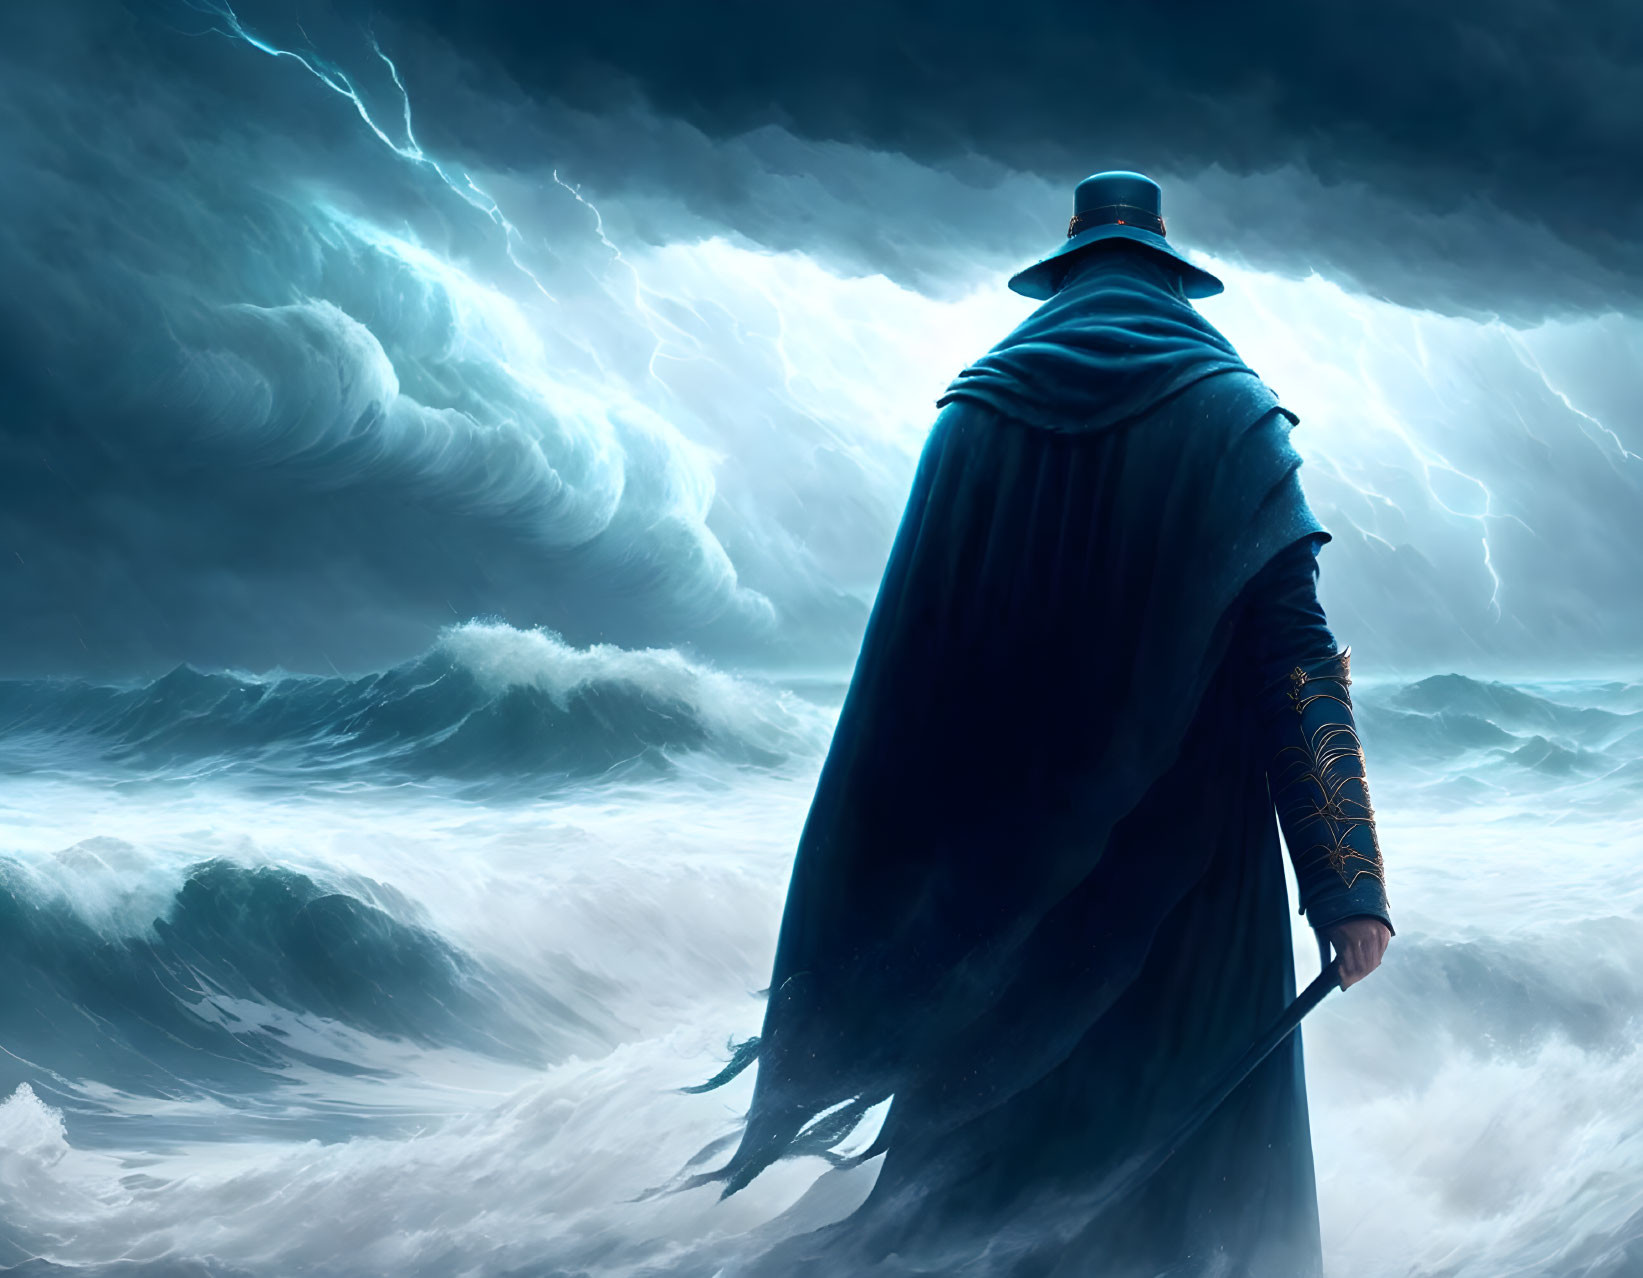 Mysterious figure in blue cloak facing stormy ocean and sky